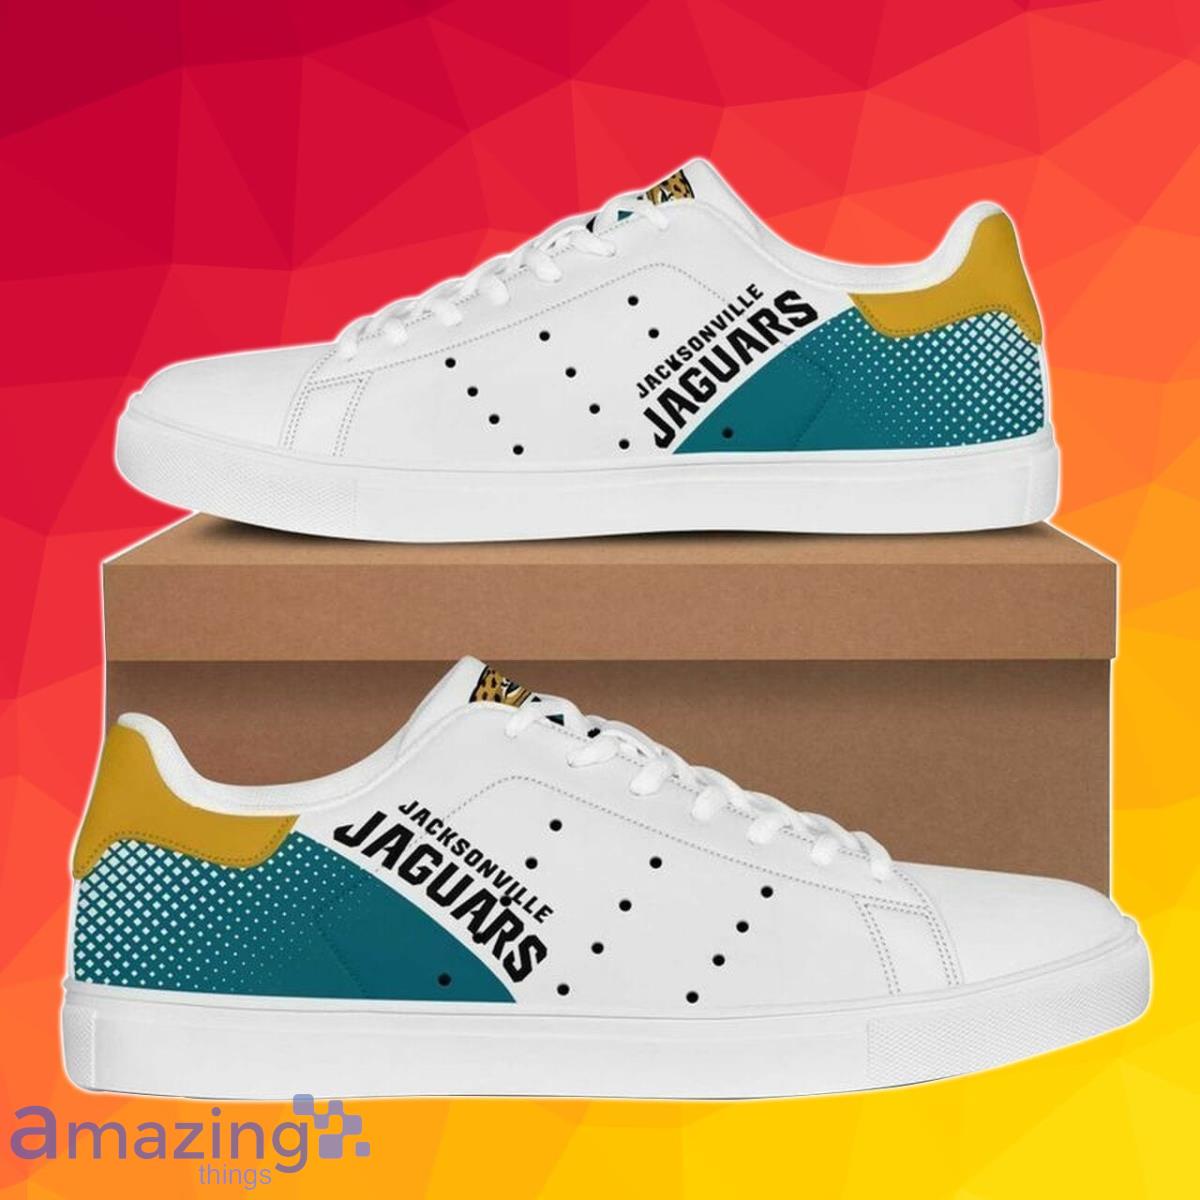 Jacksonville Jaguars stan smith sneakers Best Gift For Friend Product Photo 1